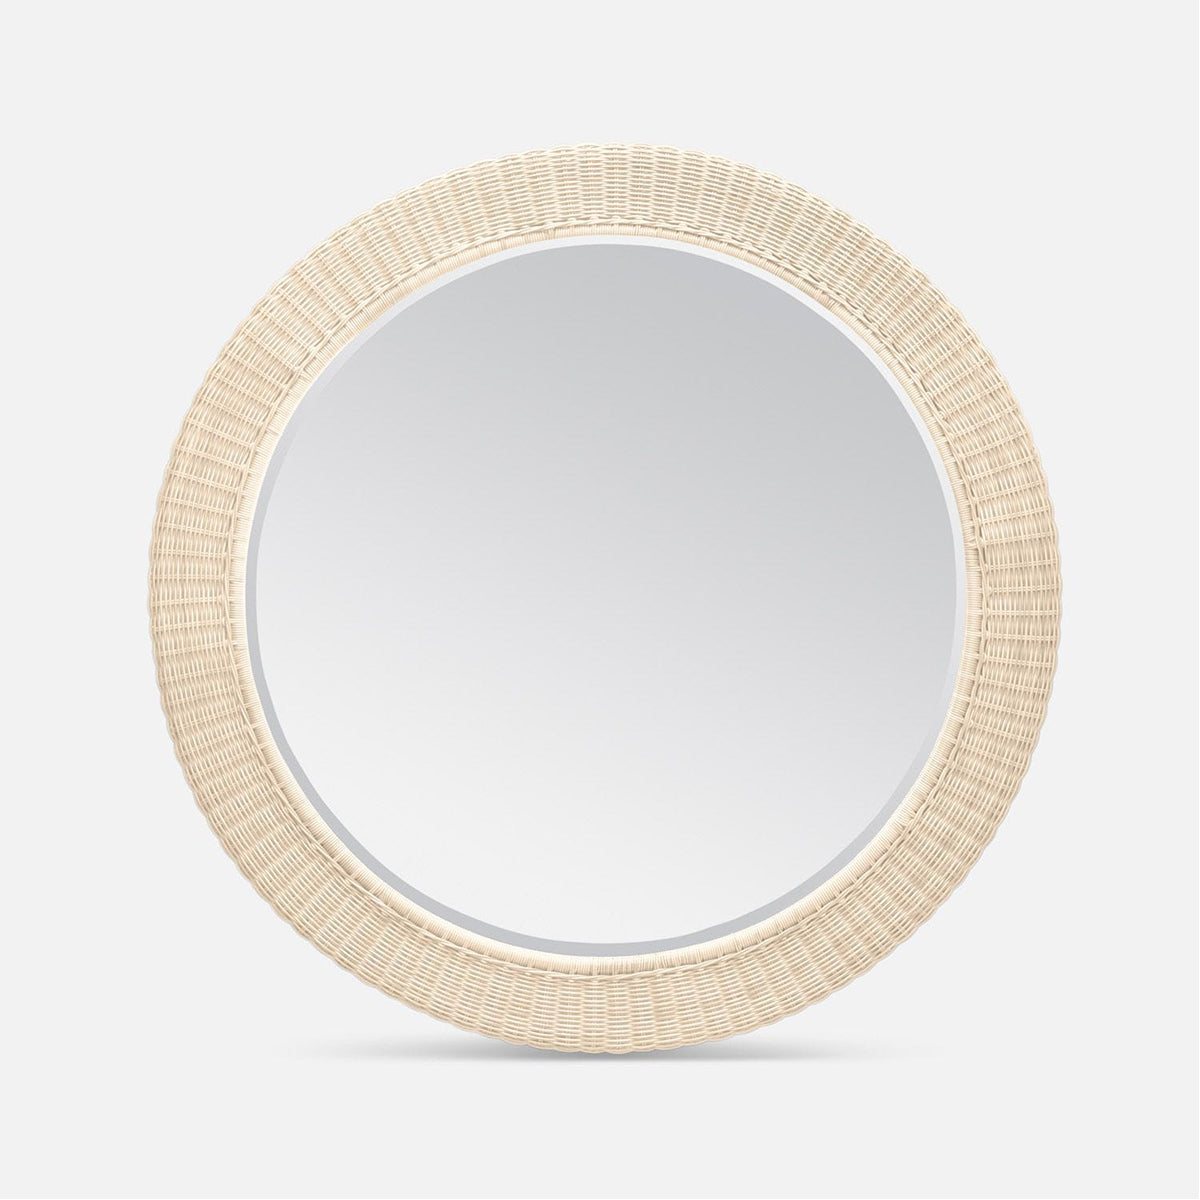 Made Goods Flannery Faux Wicker Outdoor Mirror